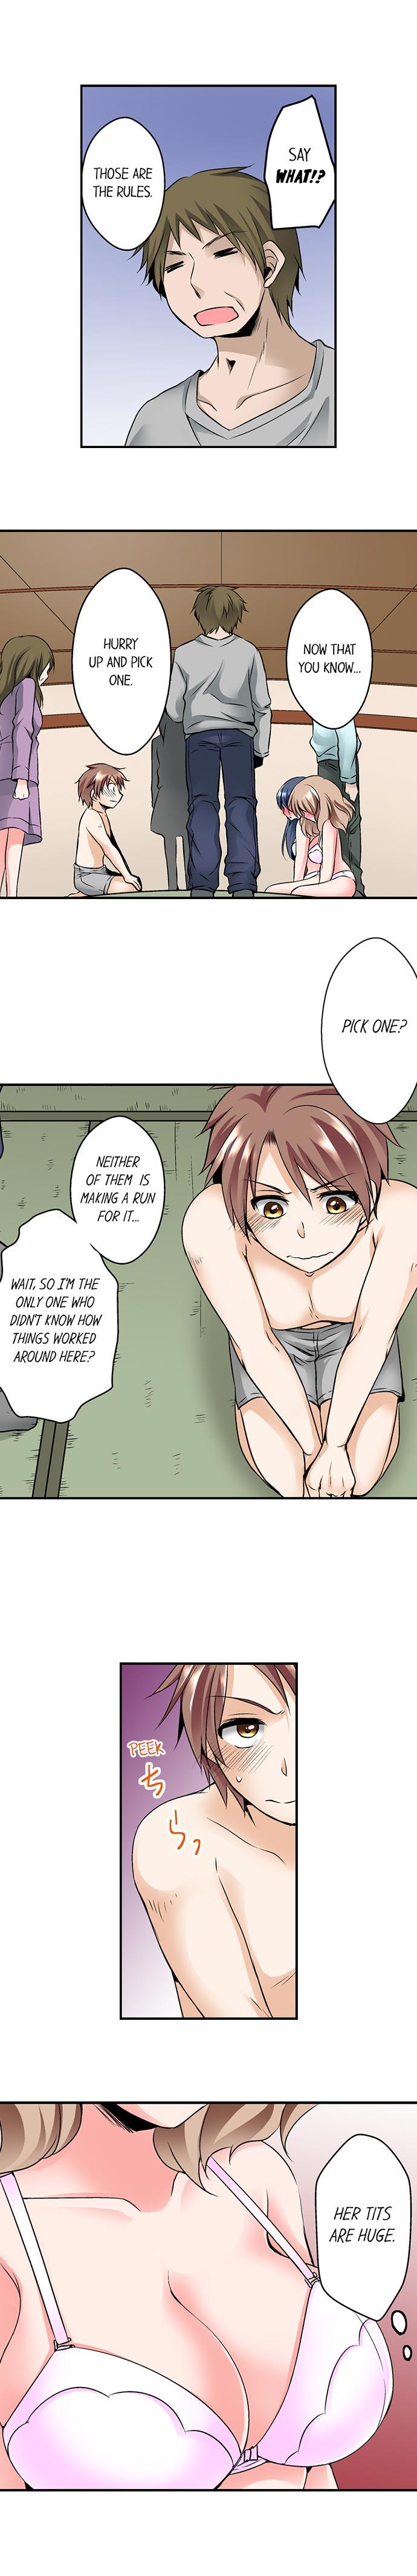 Gay Doctor Naked Matchmaking with My Childhood Friends Ch.11/? Lick - Page 9